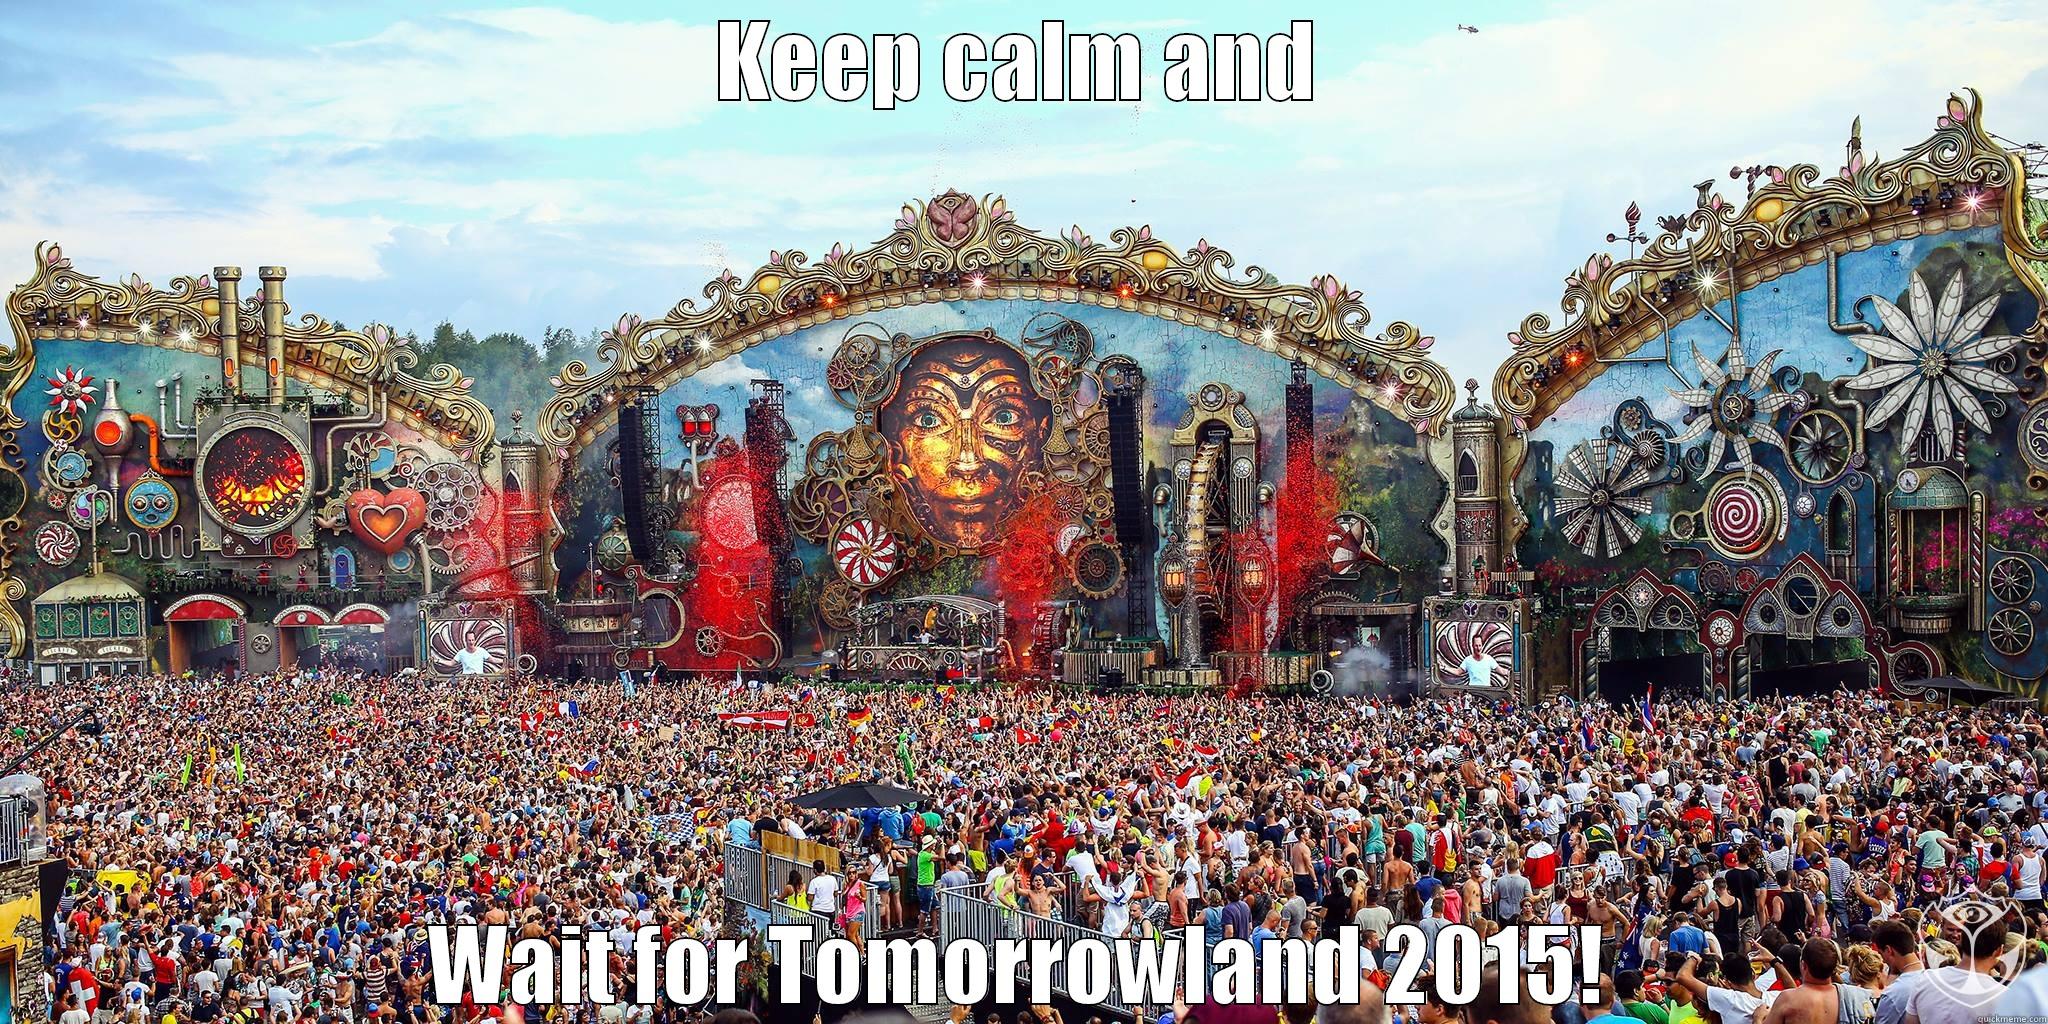 KEEP CALM AND WAIT FOR TOMORROWLAND 2015! Misc